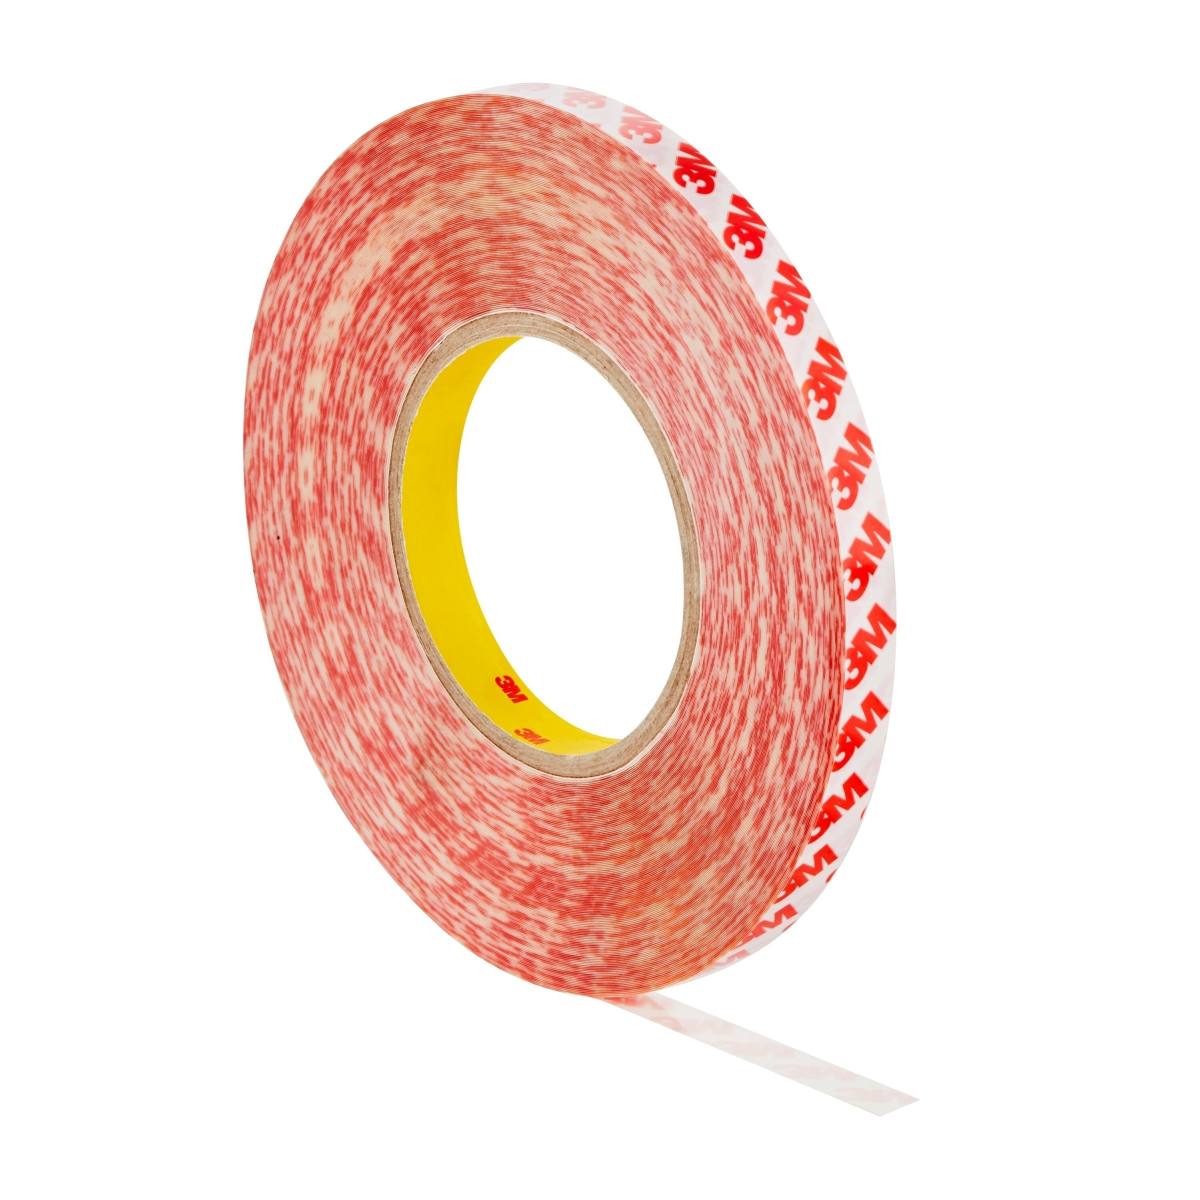 3M Double-sided adhesive tape with polyester backing GPT-020P, transparent, 50 mm x 50 m, 0.202 mm